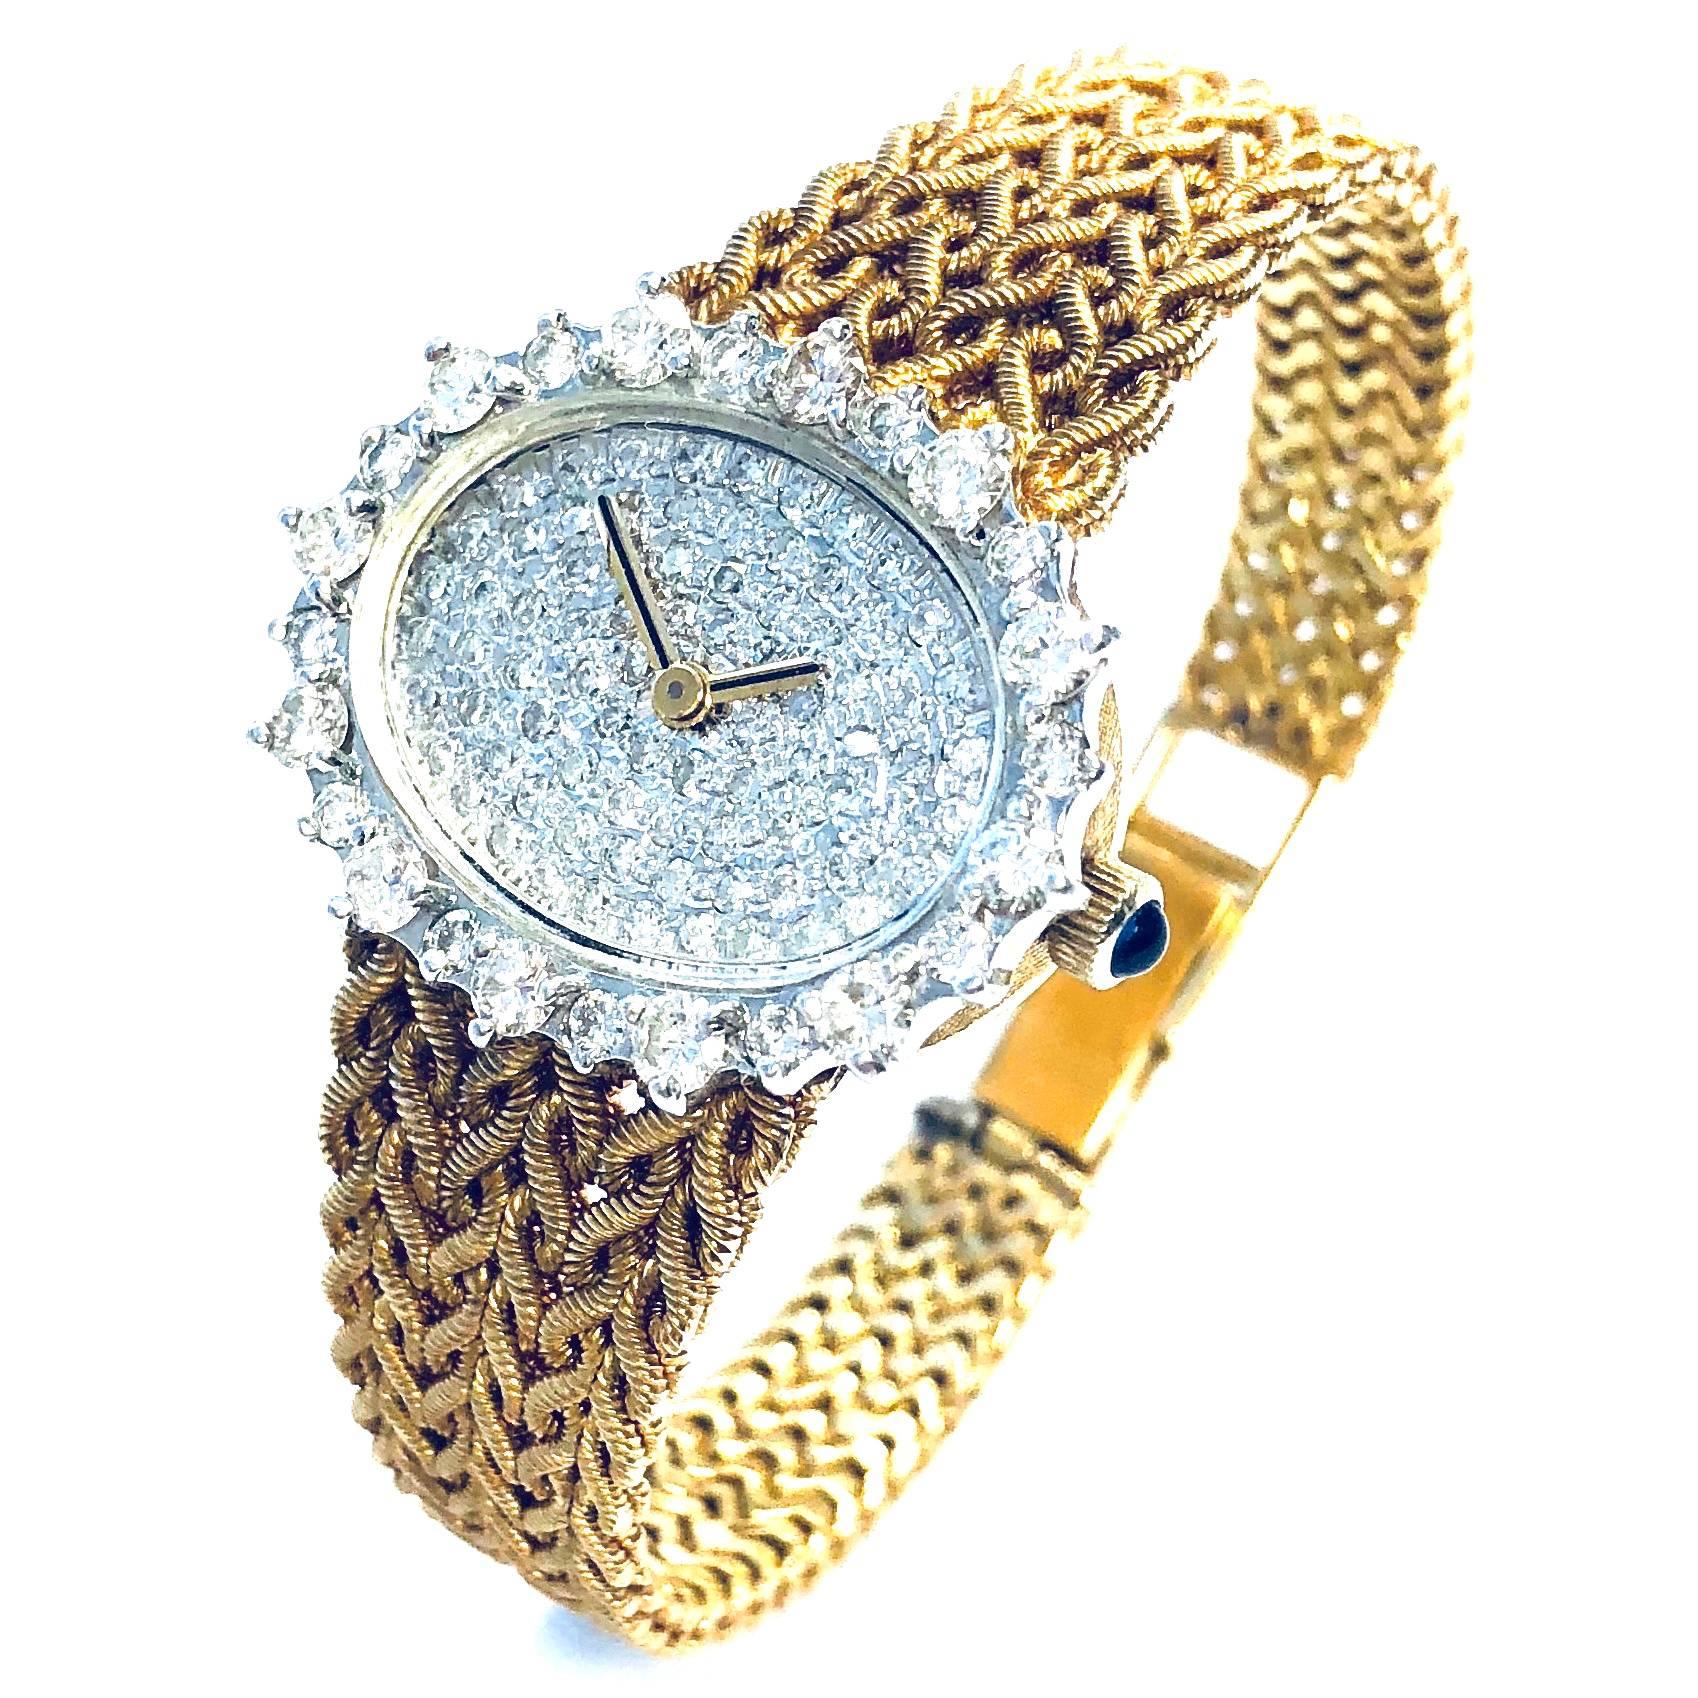 Crafted in 18K gold, the watch features a fully paved diamond dial and diamond bezel, supported by six straps of gold ropes terminating in a fold-over clasp. 
Approximate total diamond weight: 3.00ct, Color: G-H, Clarity: VS
The case including